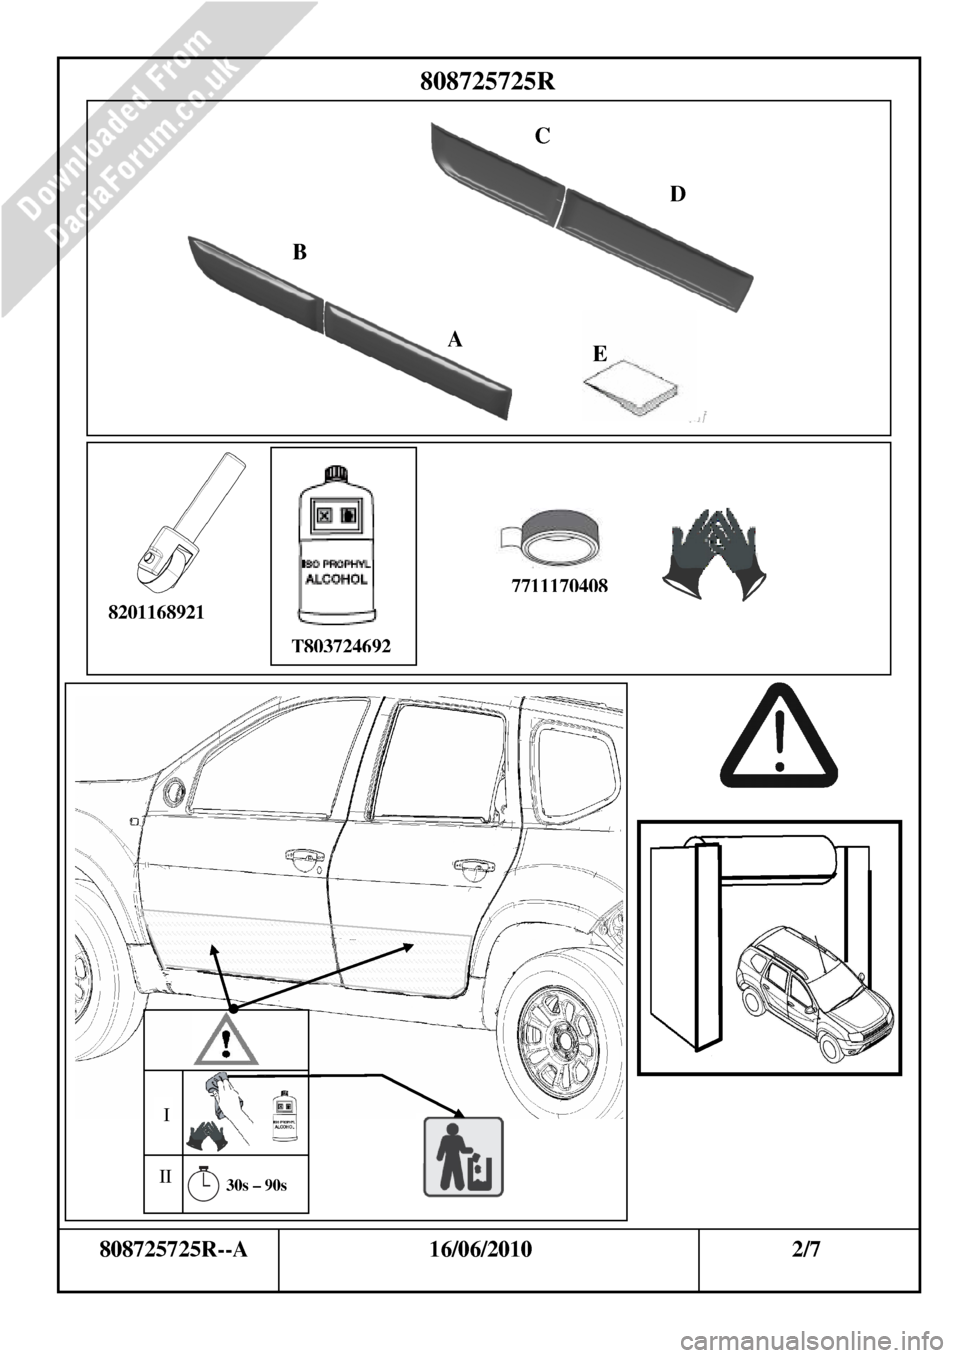 DACIA DUSTER 2010 1.G Door Mouldings Fitting Guide Workshop Manual                                                    
      808725725R--A                                16/06/2010                                              2/7 
        
A  D E 
808725725R 
B 
C 
T